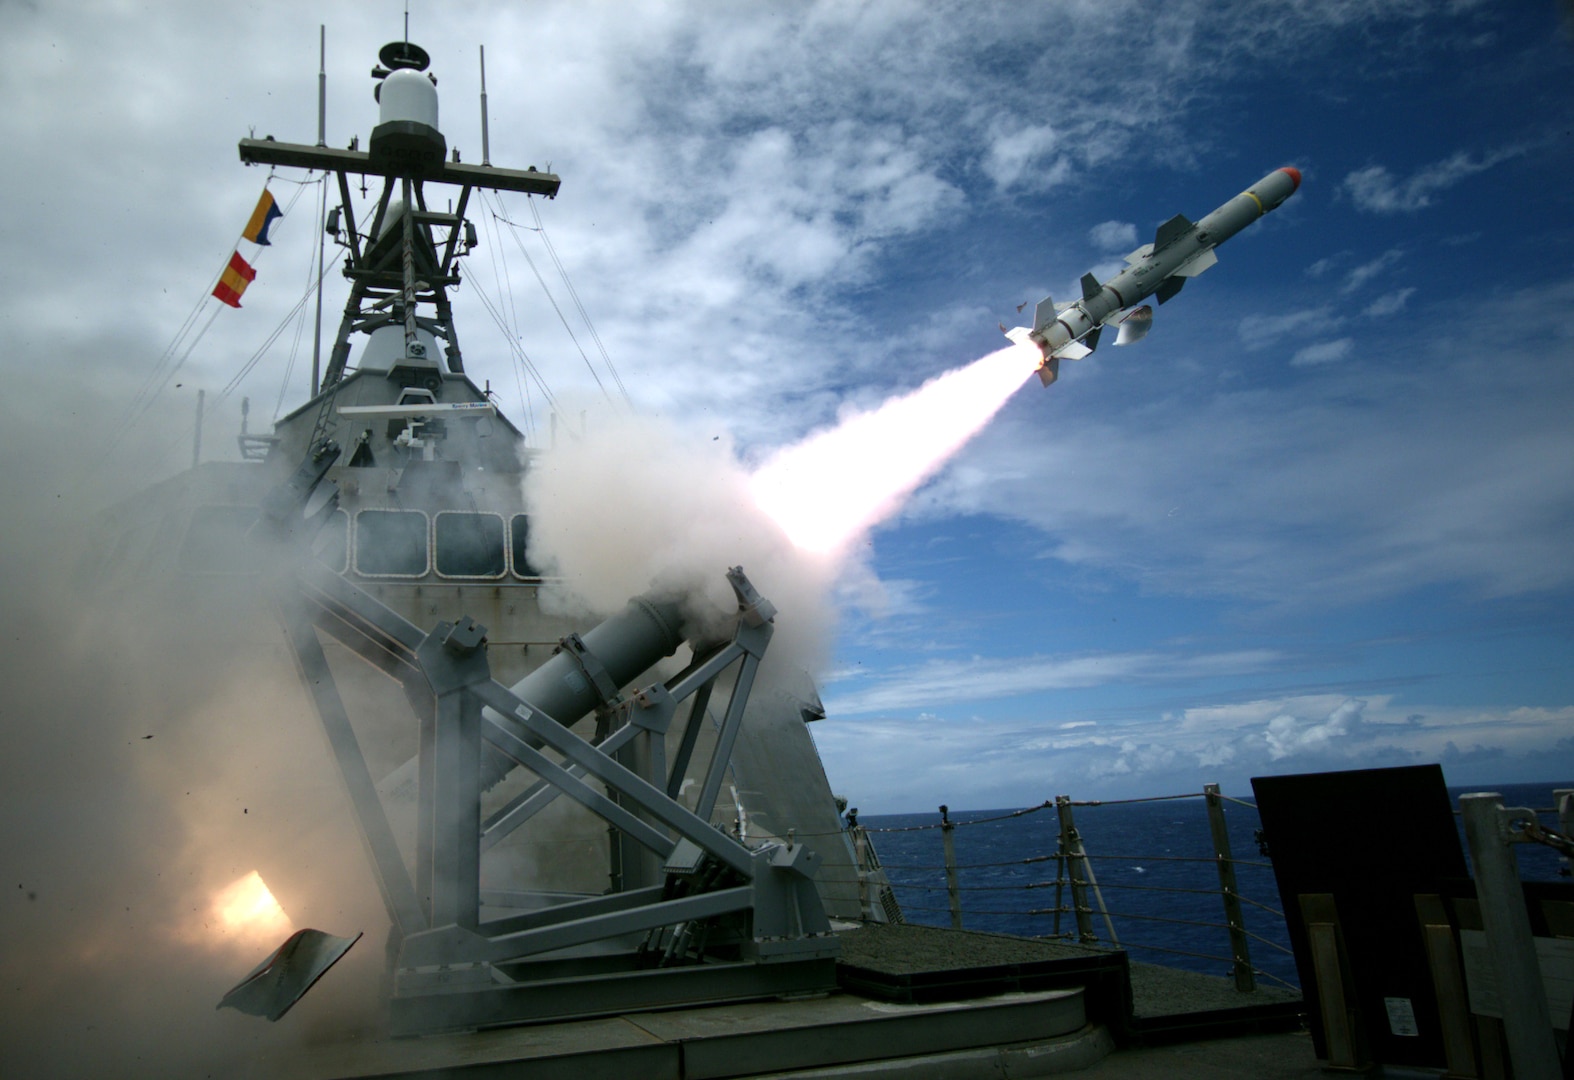 PACIFIC OCEAN (July 19, 2016) USS Coronado (LCS 4), an Independence-variant littoral combat ship, launches the first over-the-horizon missile engagement using a Harpoon Block 1C missile. Twenty-six nations, 40 ships and submarines, more than 200 aircraft and 25,000 personnel are participating in RIMPAC from June 30 to Aug. 4, in and around the Hawaiian Islands and Southern California. The world's largest international maritime exercise, RIMPAC provides a unique training opportunity that helps participants foster and sustain the cooperative relationships that are critical to ensuring the safety of sea lanes and security on the world's oceans. RIMPAC 2016 is the 25th exercise in the series that began in 1971. 
